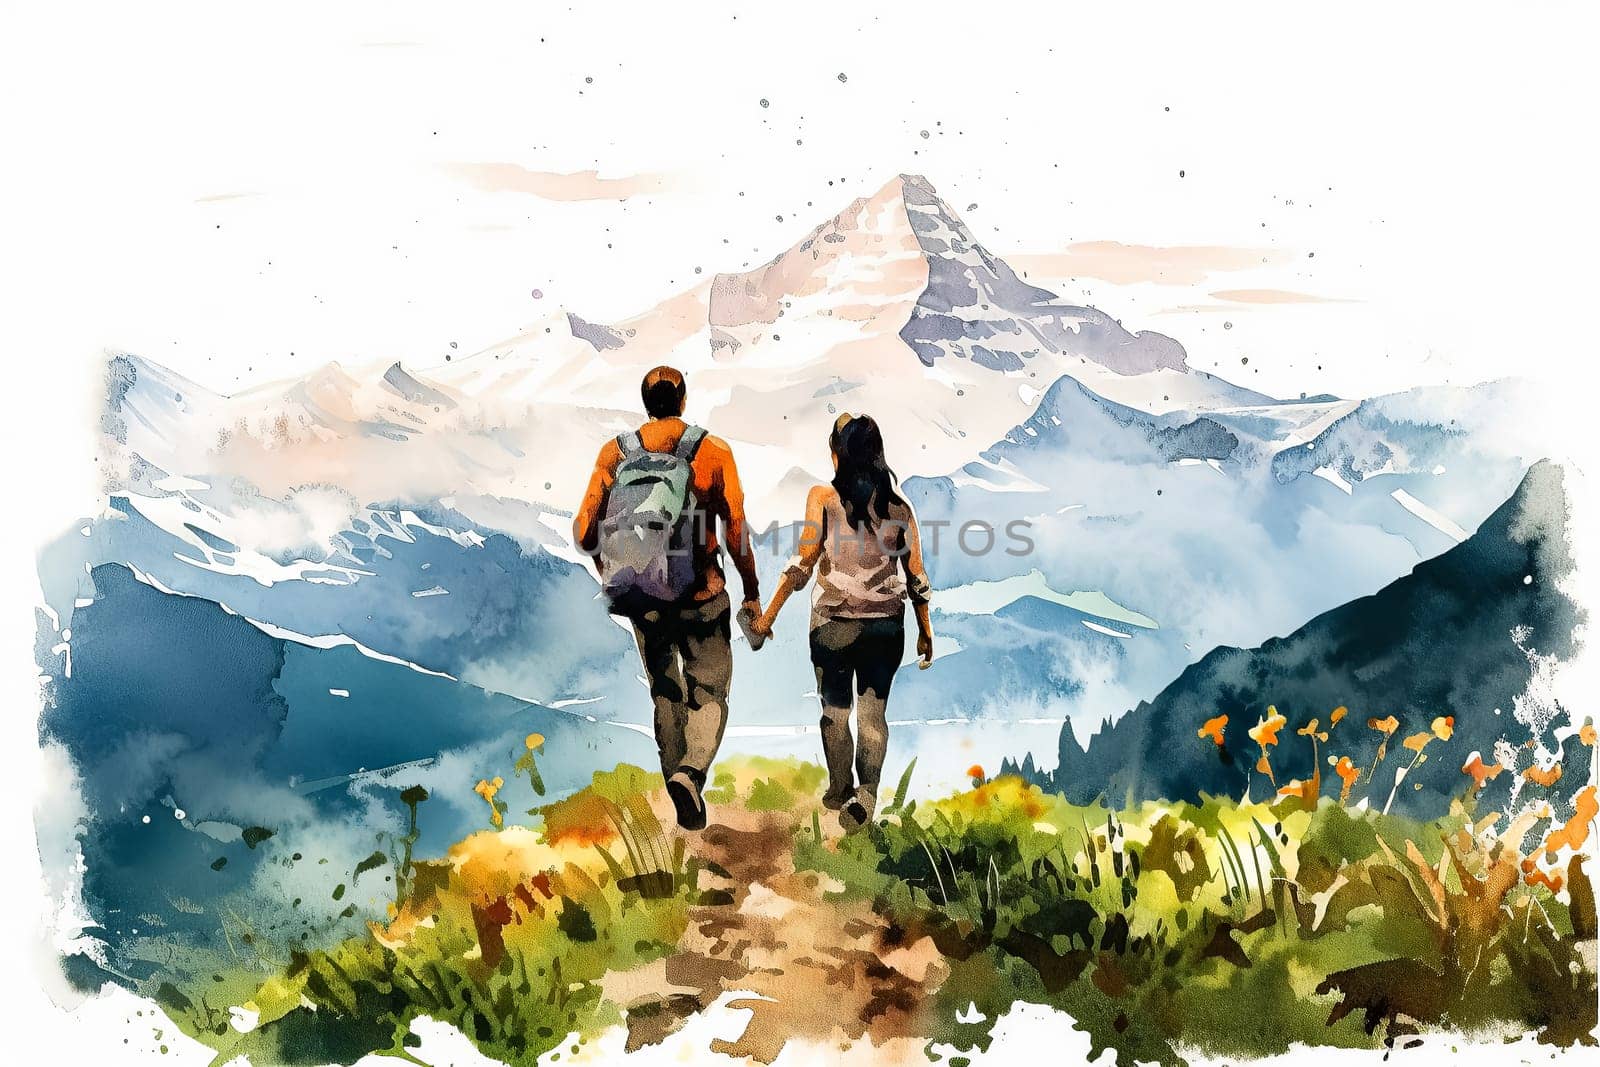 Experience the serenity of love with a watercolor illustration depicting a couple in the mountains. A picturesque scene capturing the essence of romance and togetherness.